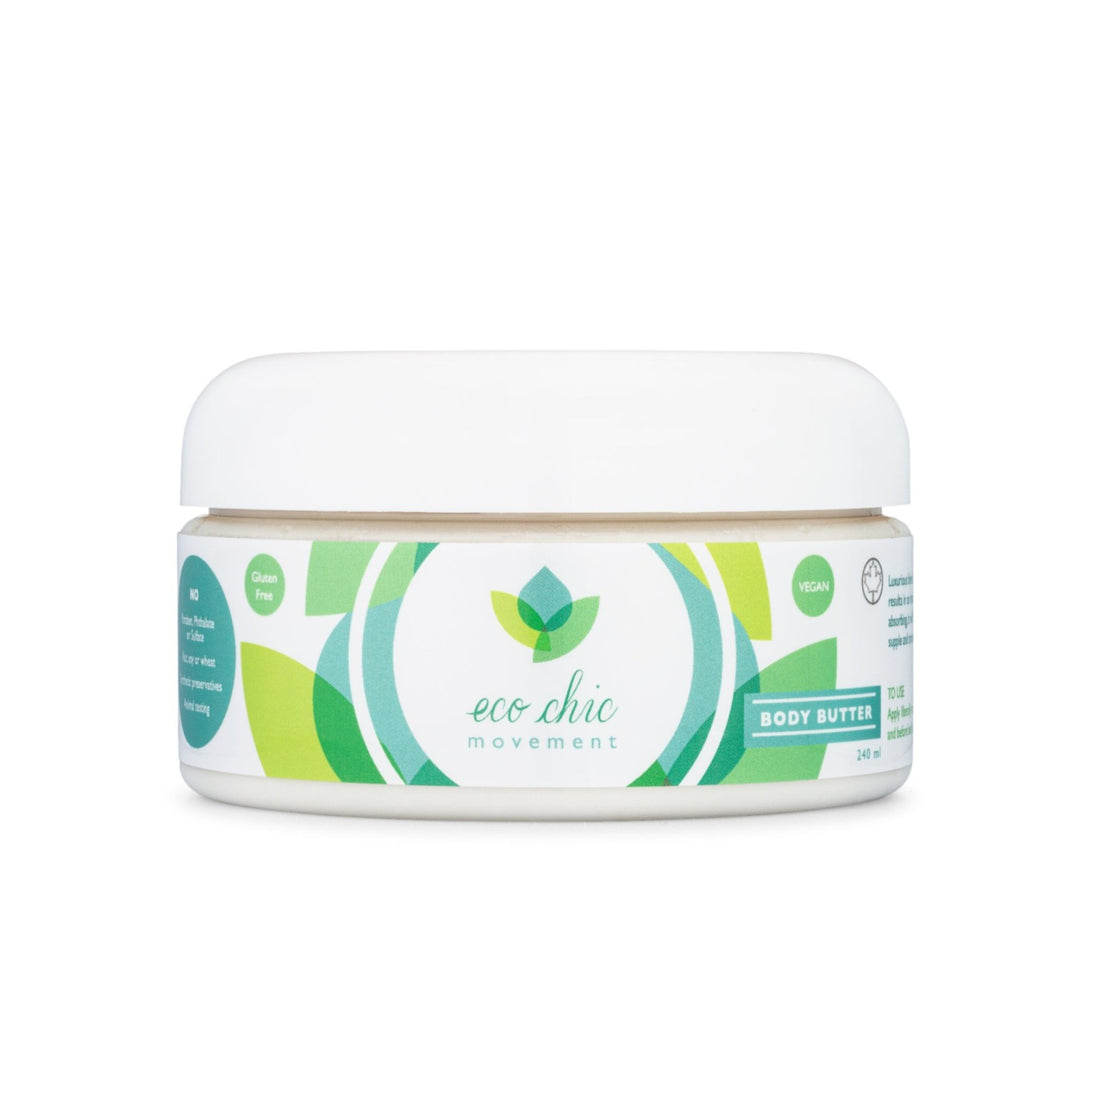 A tub of vegan, non toxic ,natural body butter from Eco Chic Movement